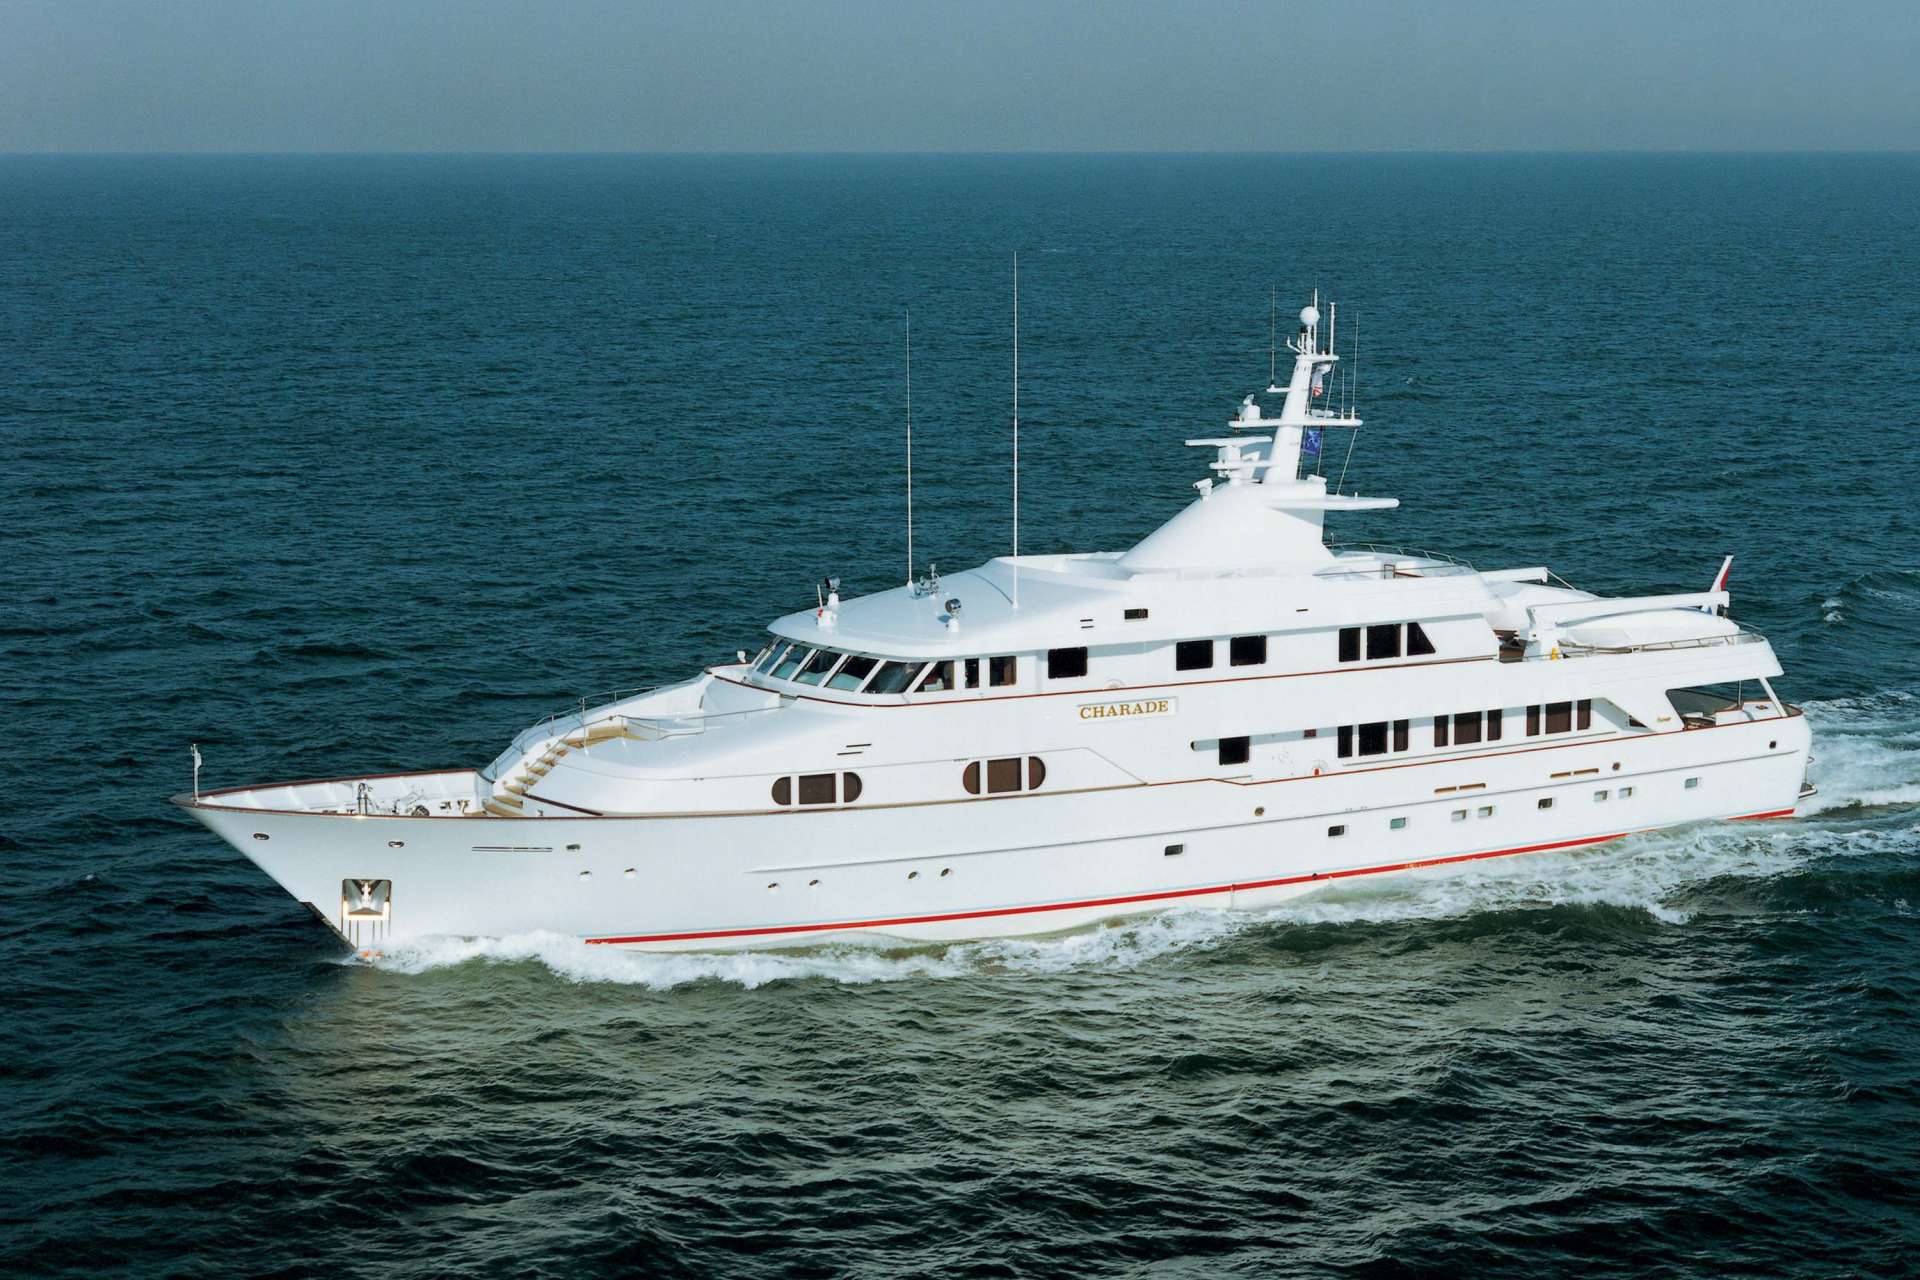 BG Yacht • Feadship • 1990 • Owner Bobby Genovese • Featured as VALOR in Below Deck